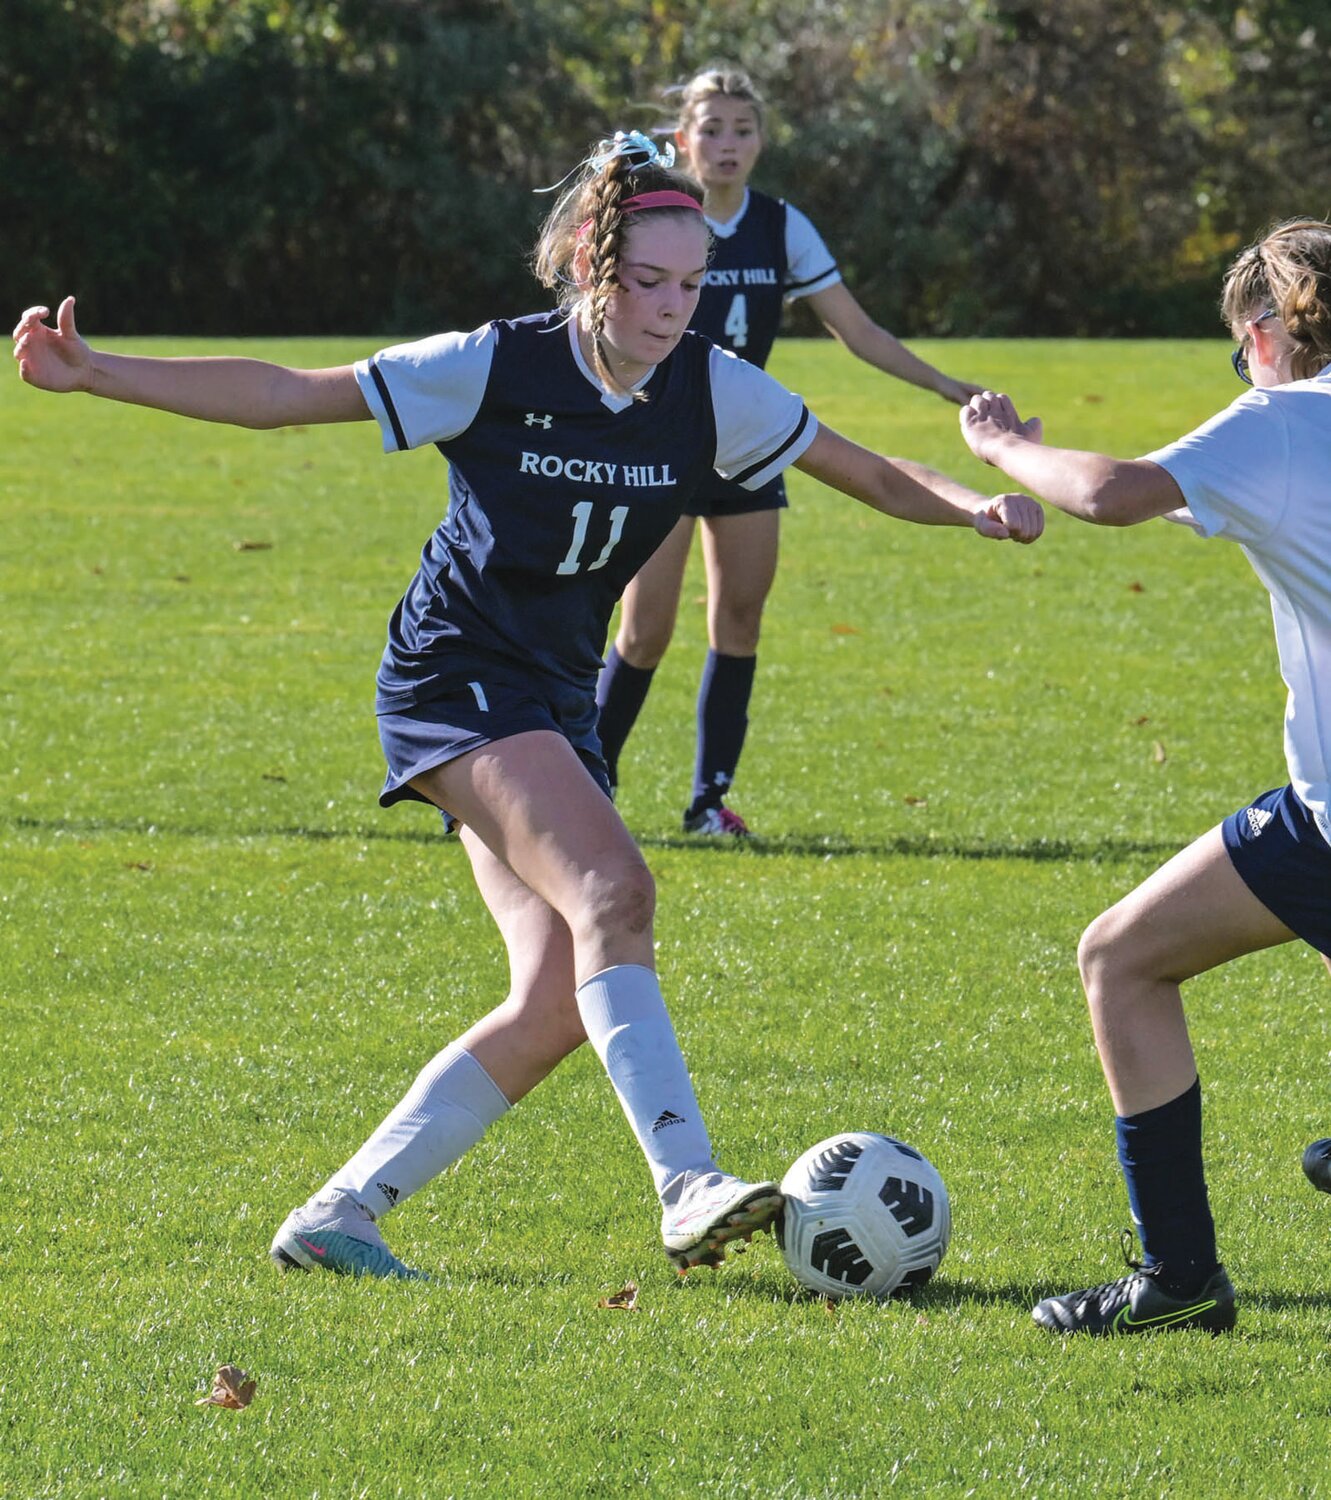 UP THE FIELD: Rocky Hill’s Emma Morrison makes a play.